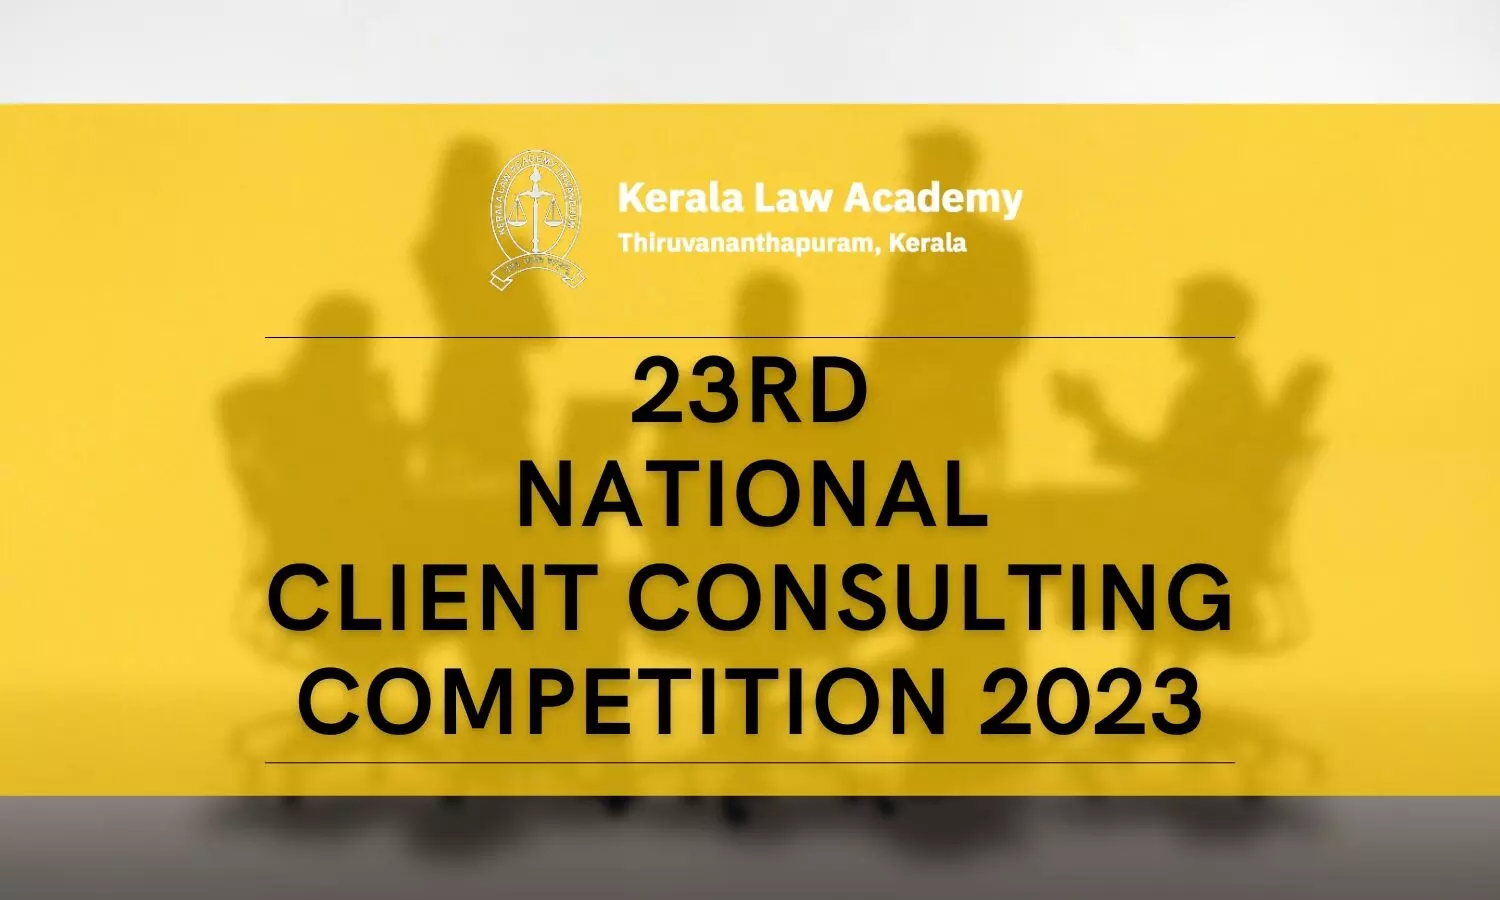 23rd National Client Consulting Competition 2023 | Kerala Law Academy